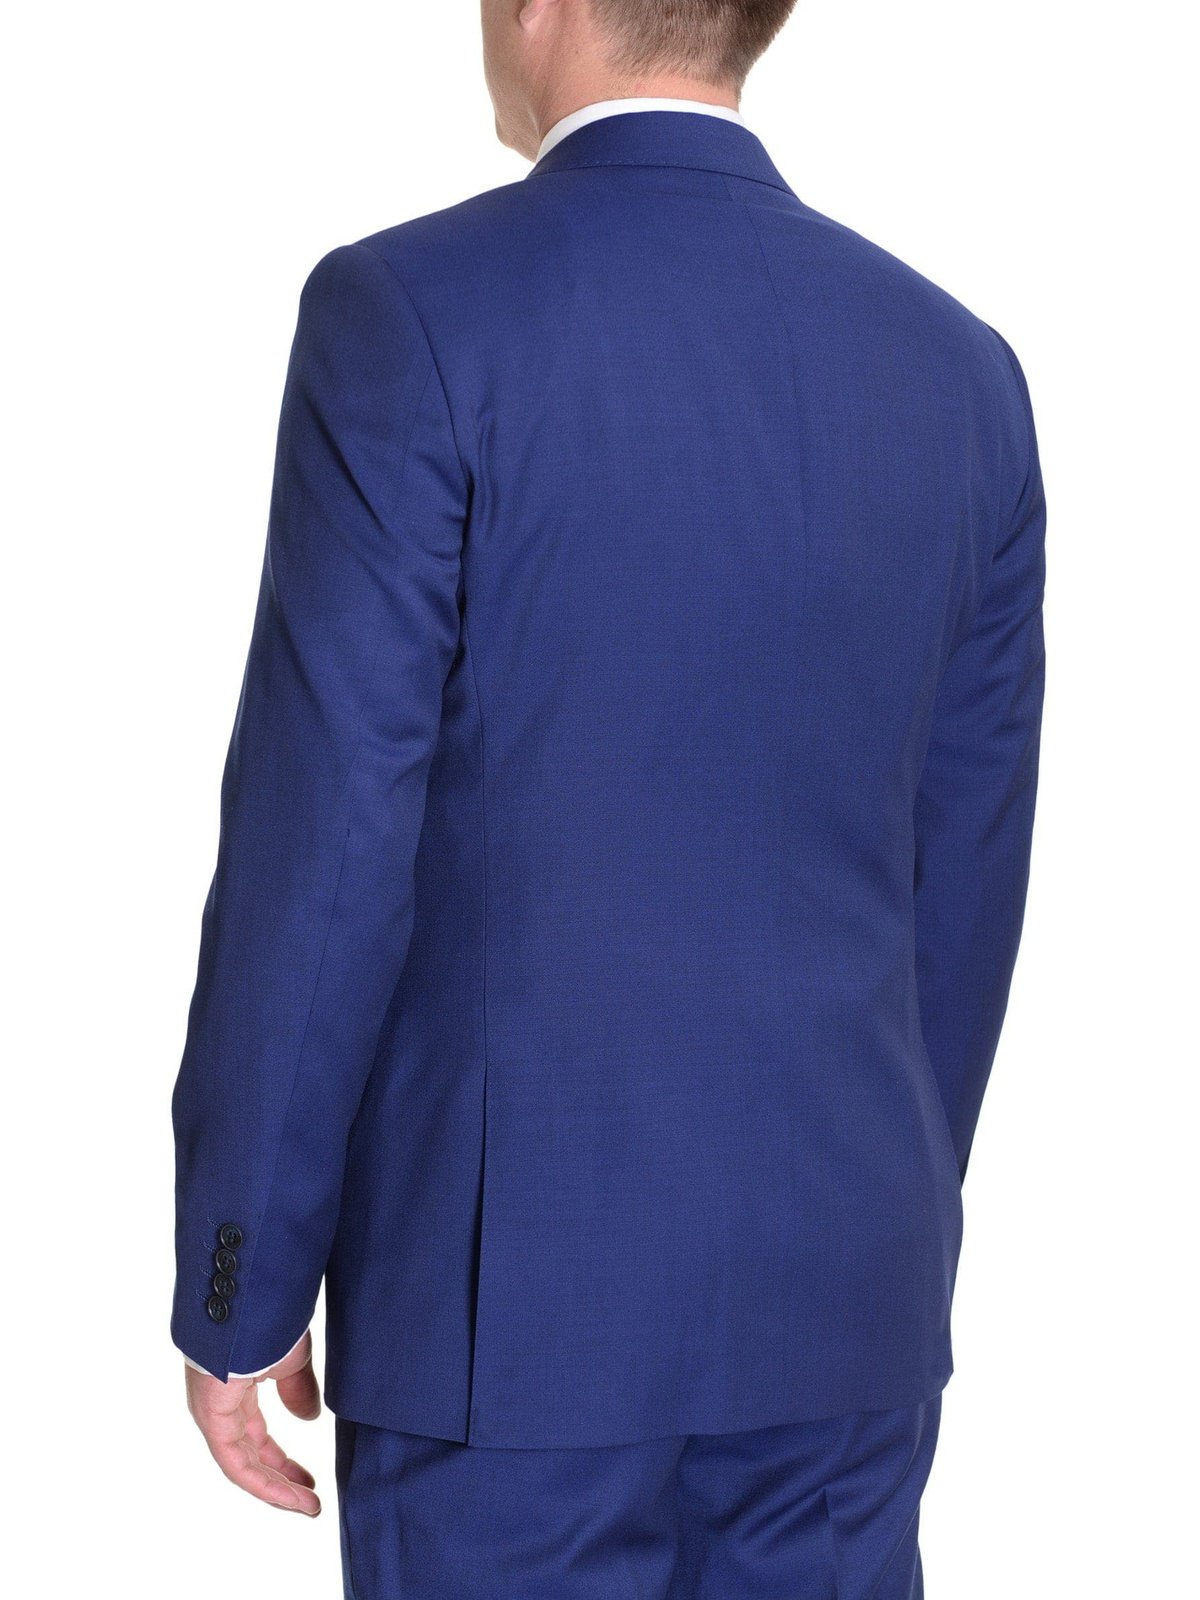 London Fog TWO PIECE SUITS Extra Slim Fit Solid Royal Blue Two Button Wool Suit